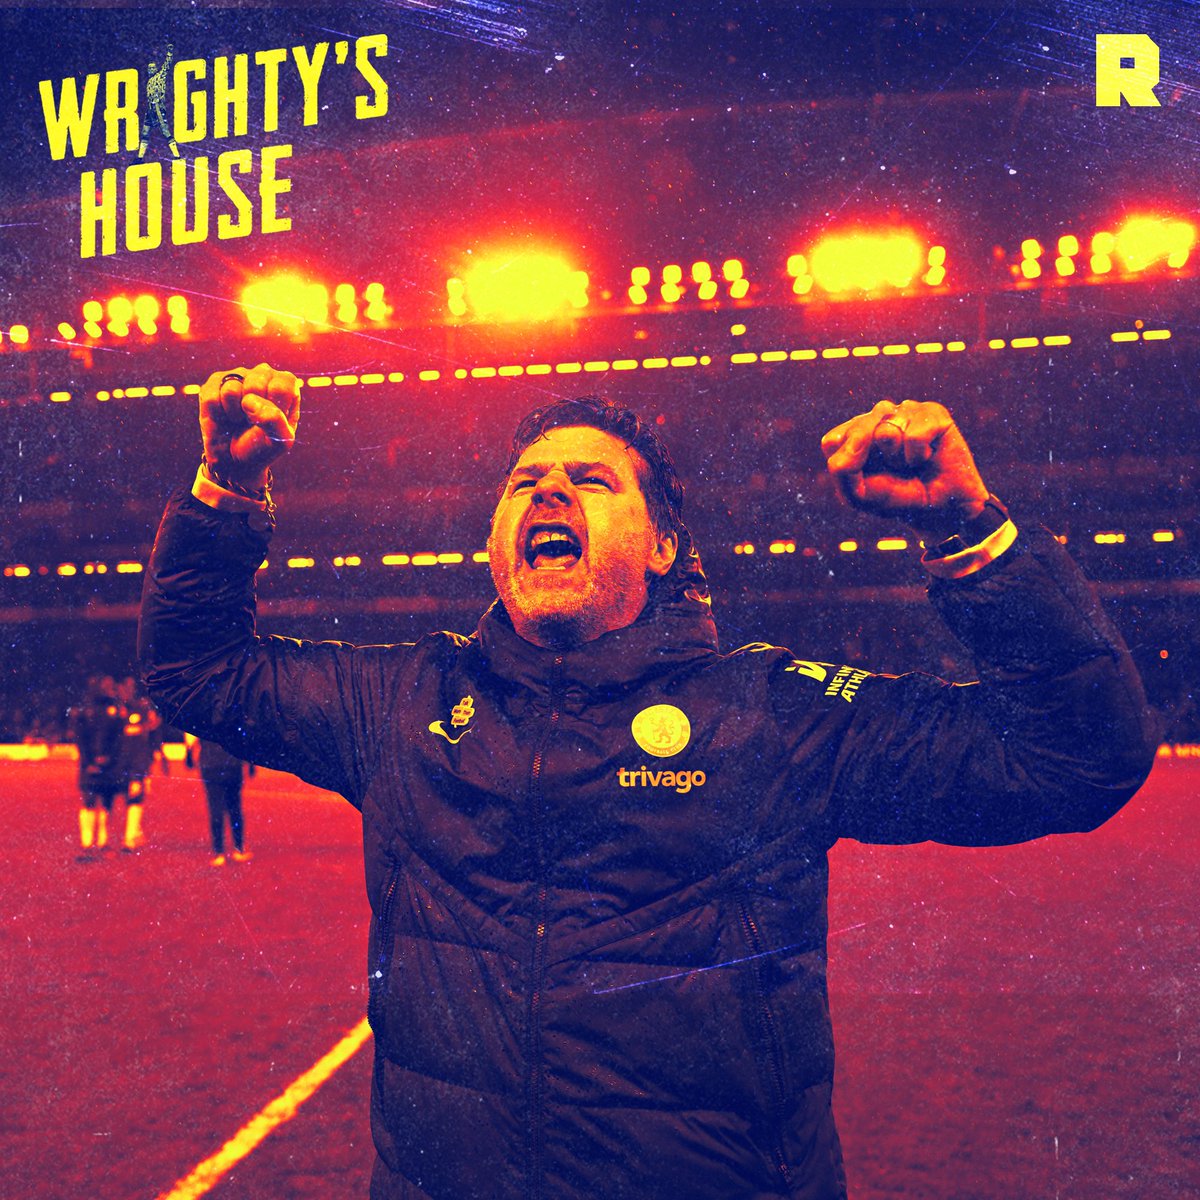 New episode up on @ringerpodcasts! @IanWright0 is joined by @Ankaman616 and @MayowaQuadri_ to talk about Chelsea’s late win against Manchester United, Alexis Mac Allister’s goal and more! open.spotify.com/episode/4FZxU0…